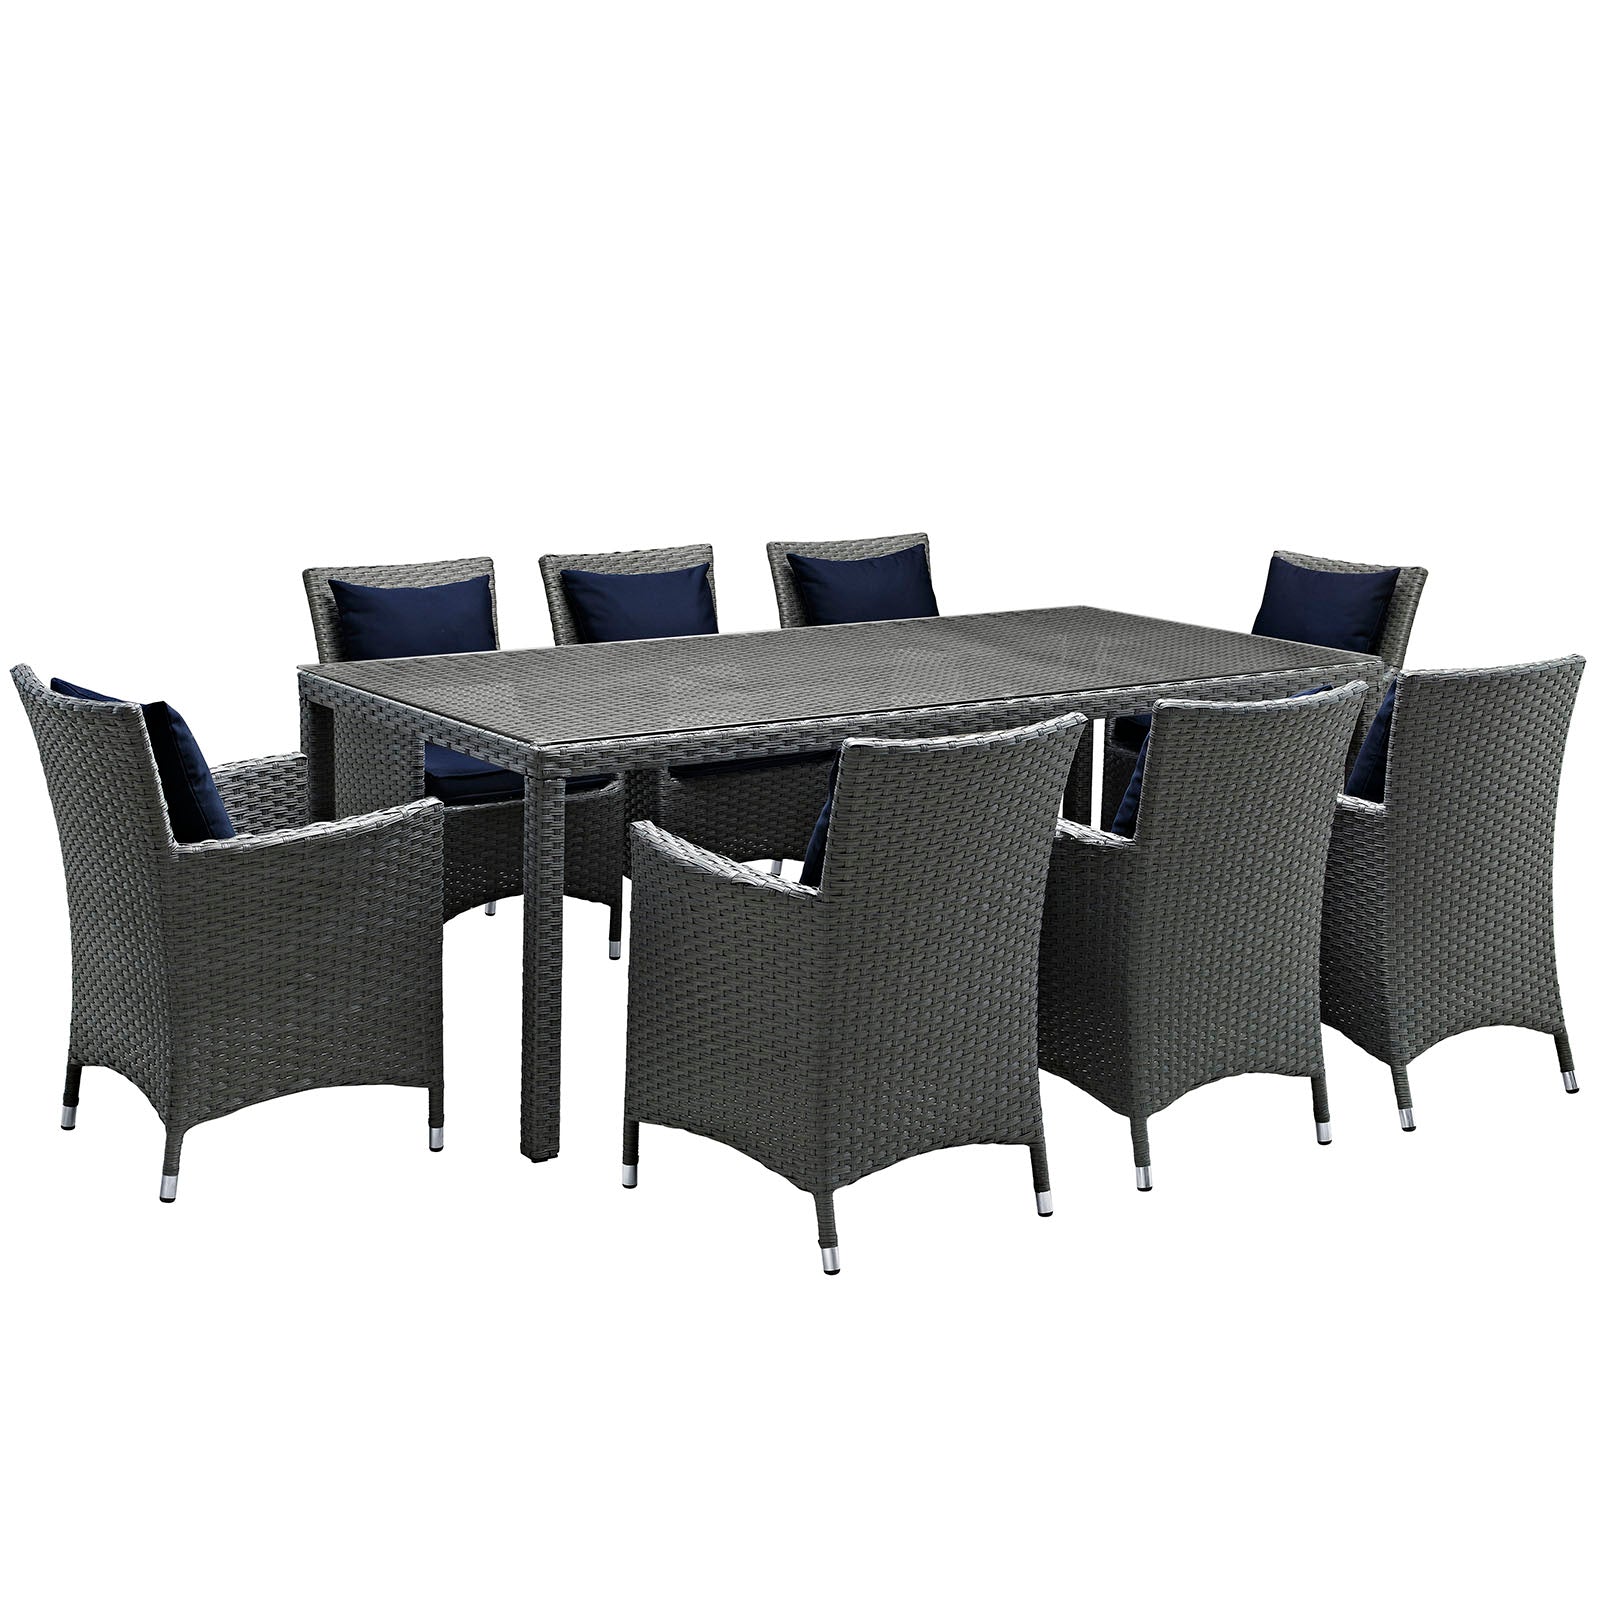 Modway Outdoor Dining Sets - Sojourn 9 Piece Outdoor Patio Sunbrella Dining Set Canvas Navy